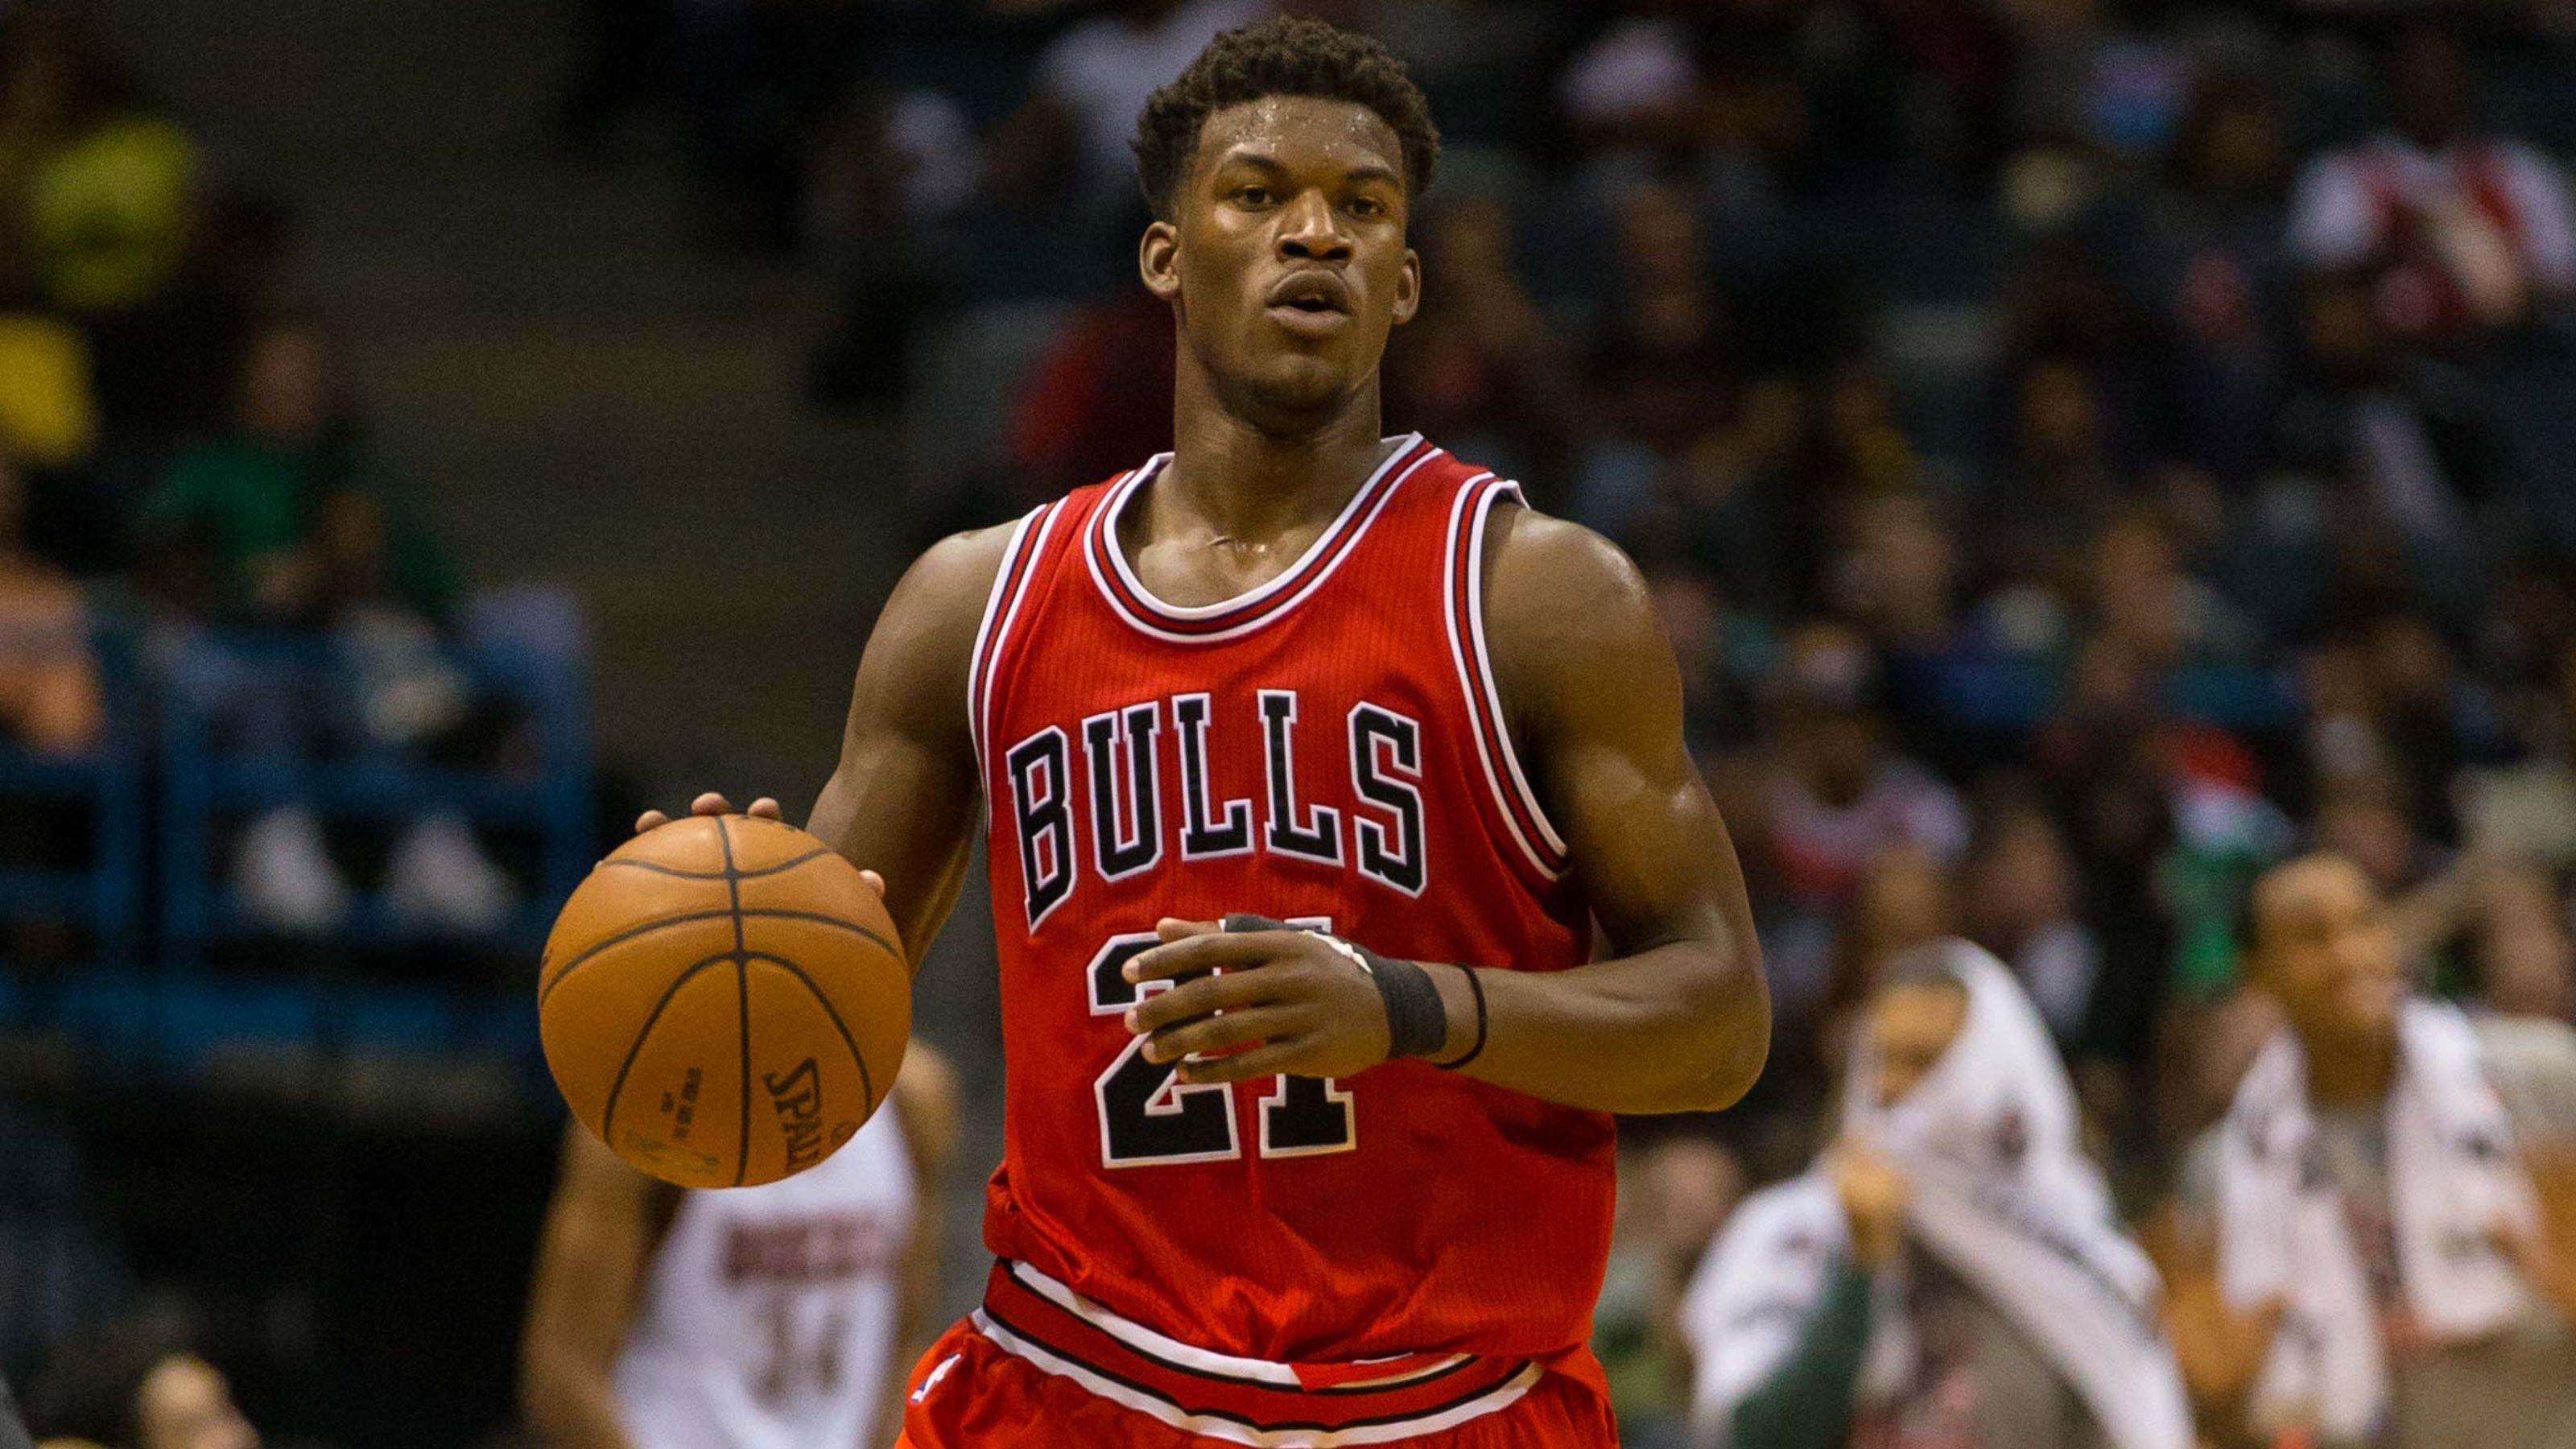 Jimmy Butler Wallpaper High Resolution and Quality Download